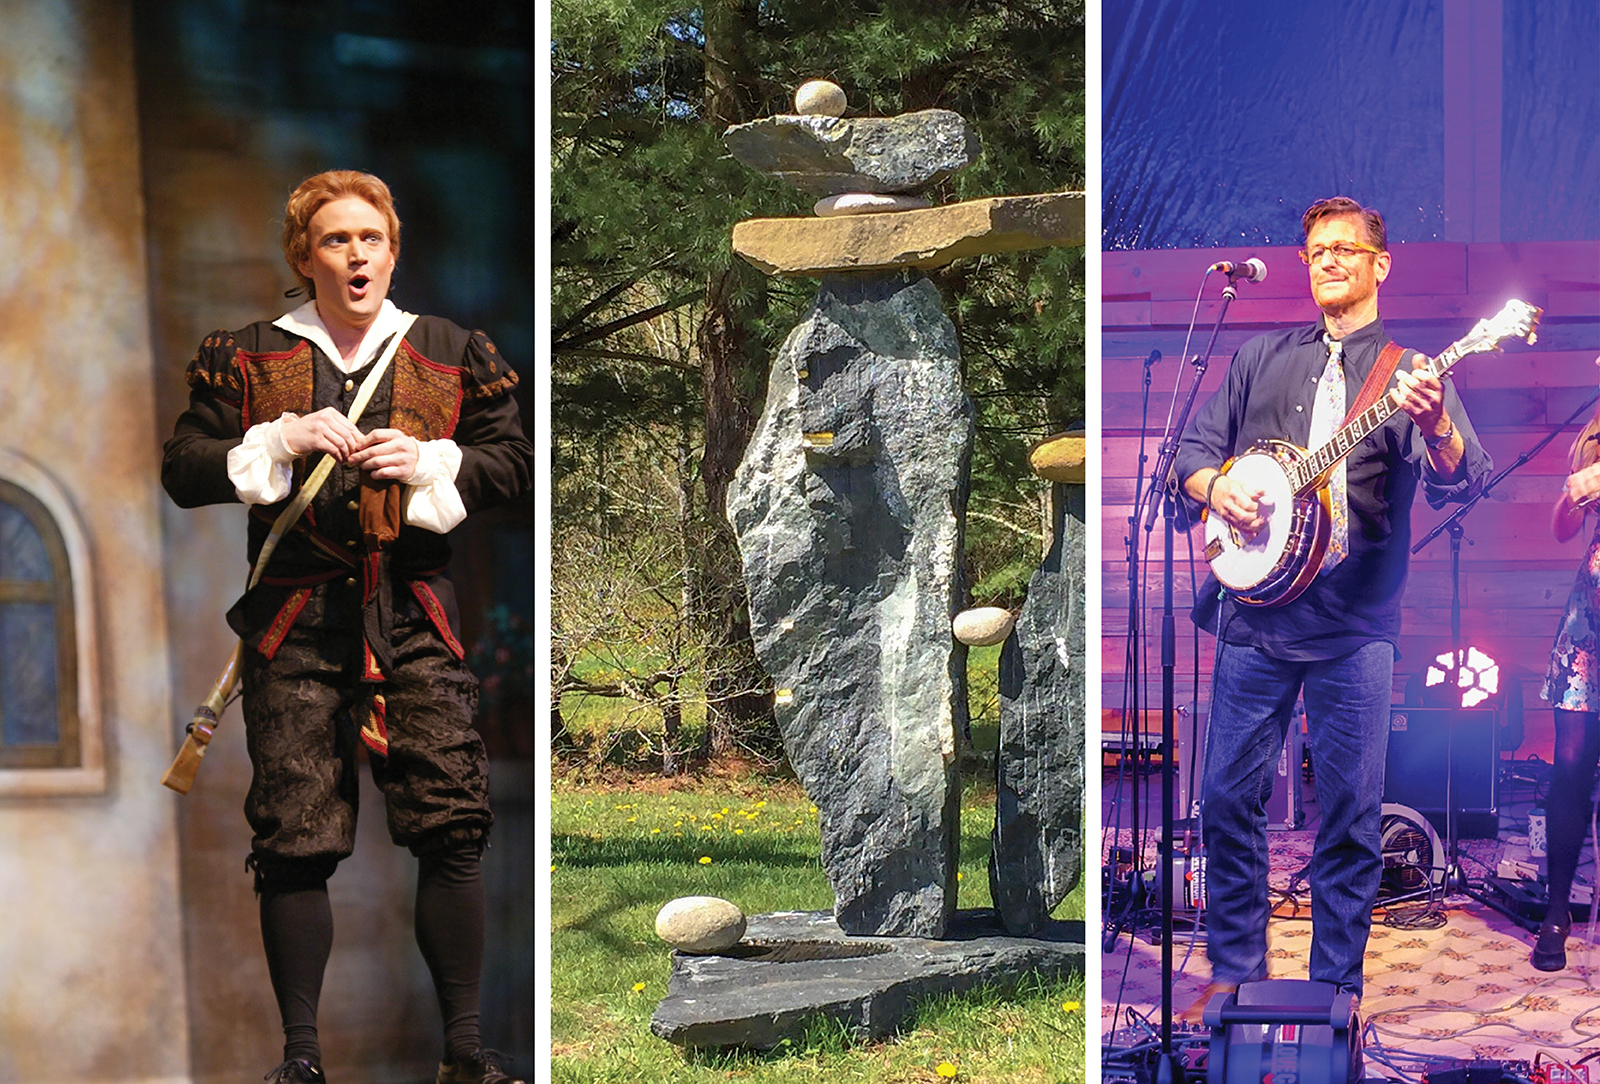 Performing arts abound in Highlands and Cashiers NC